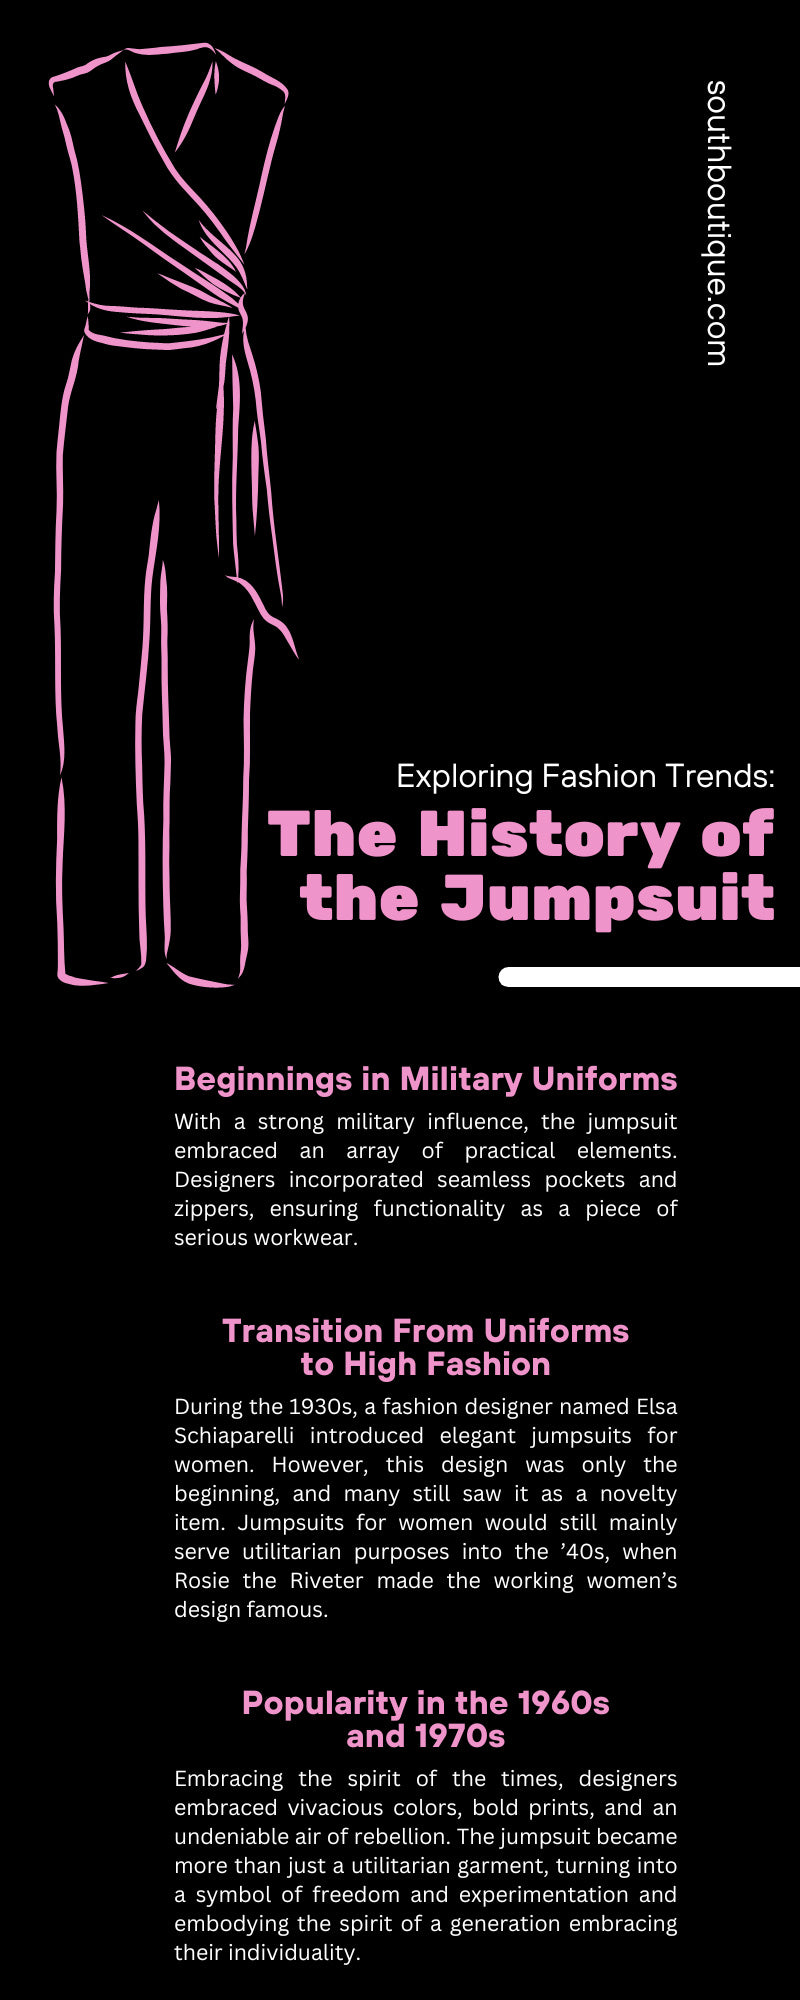 Exploring Fashion Trends: The History of the Jumpsuit